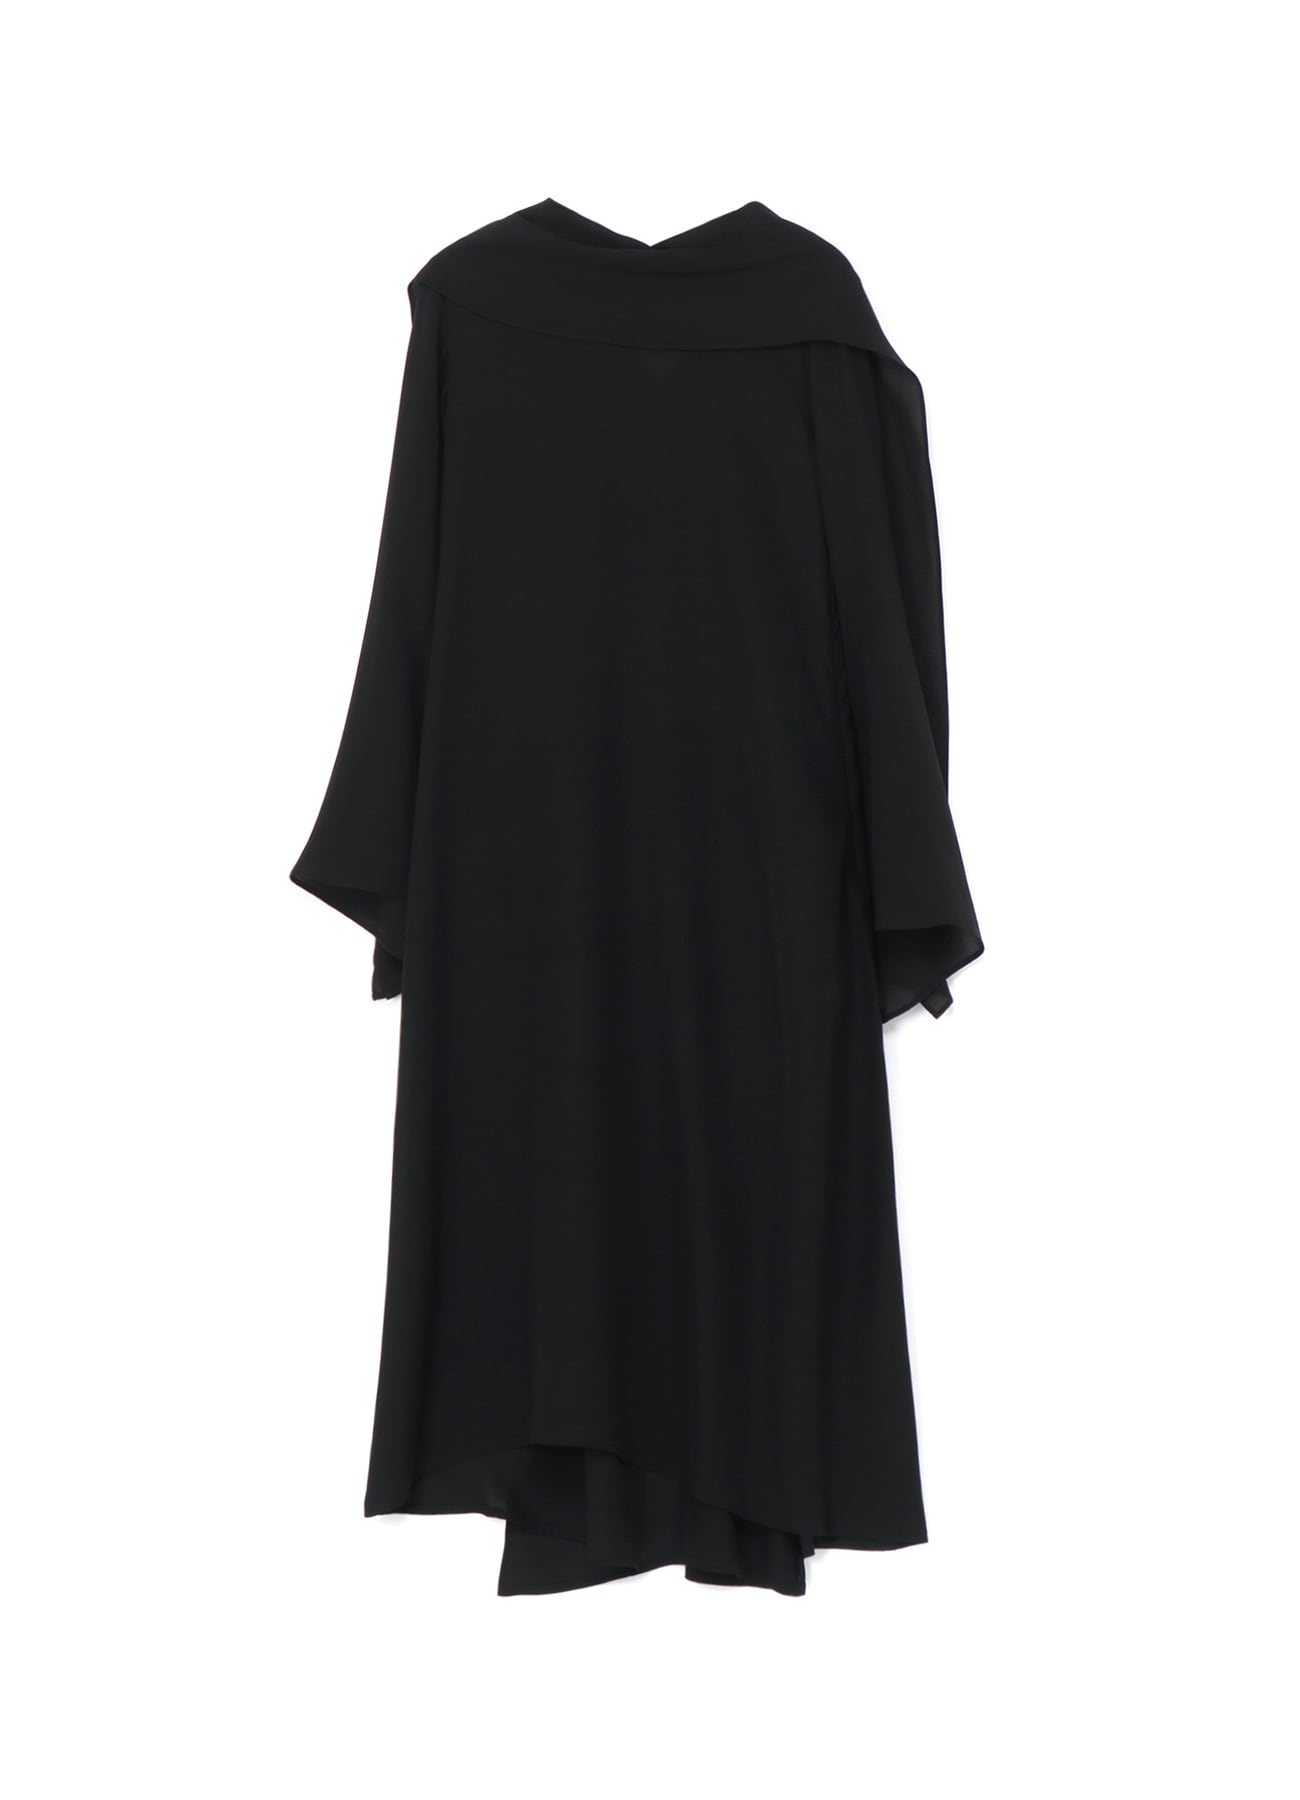 20 MOMME SILK LONG DRESS WITH STOLE-STYLE COLLAR